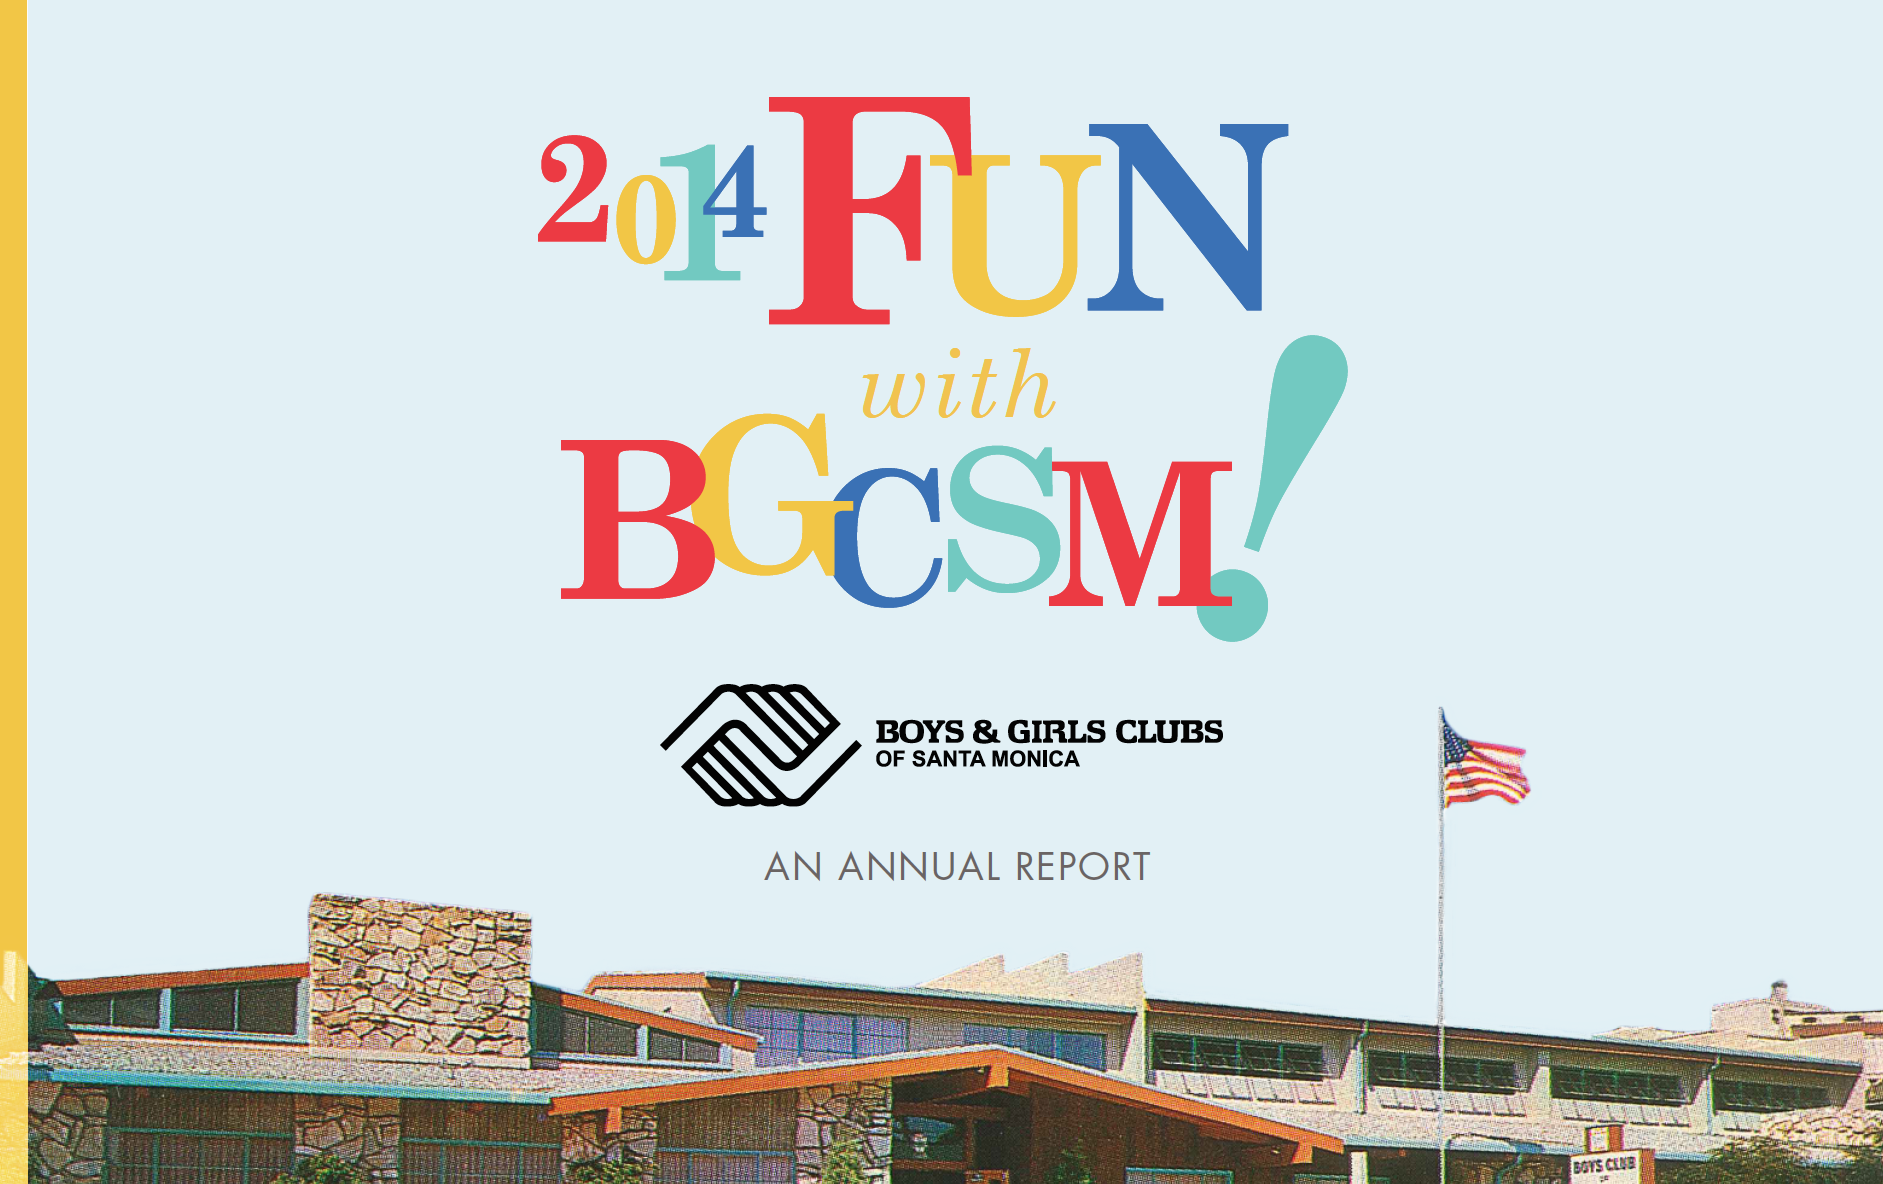 2014 Fun with BGCSM! Our Annual Report!